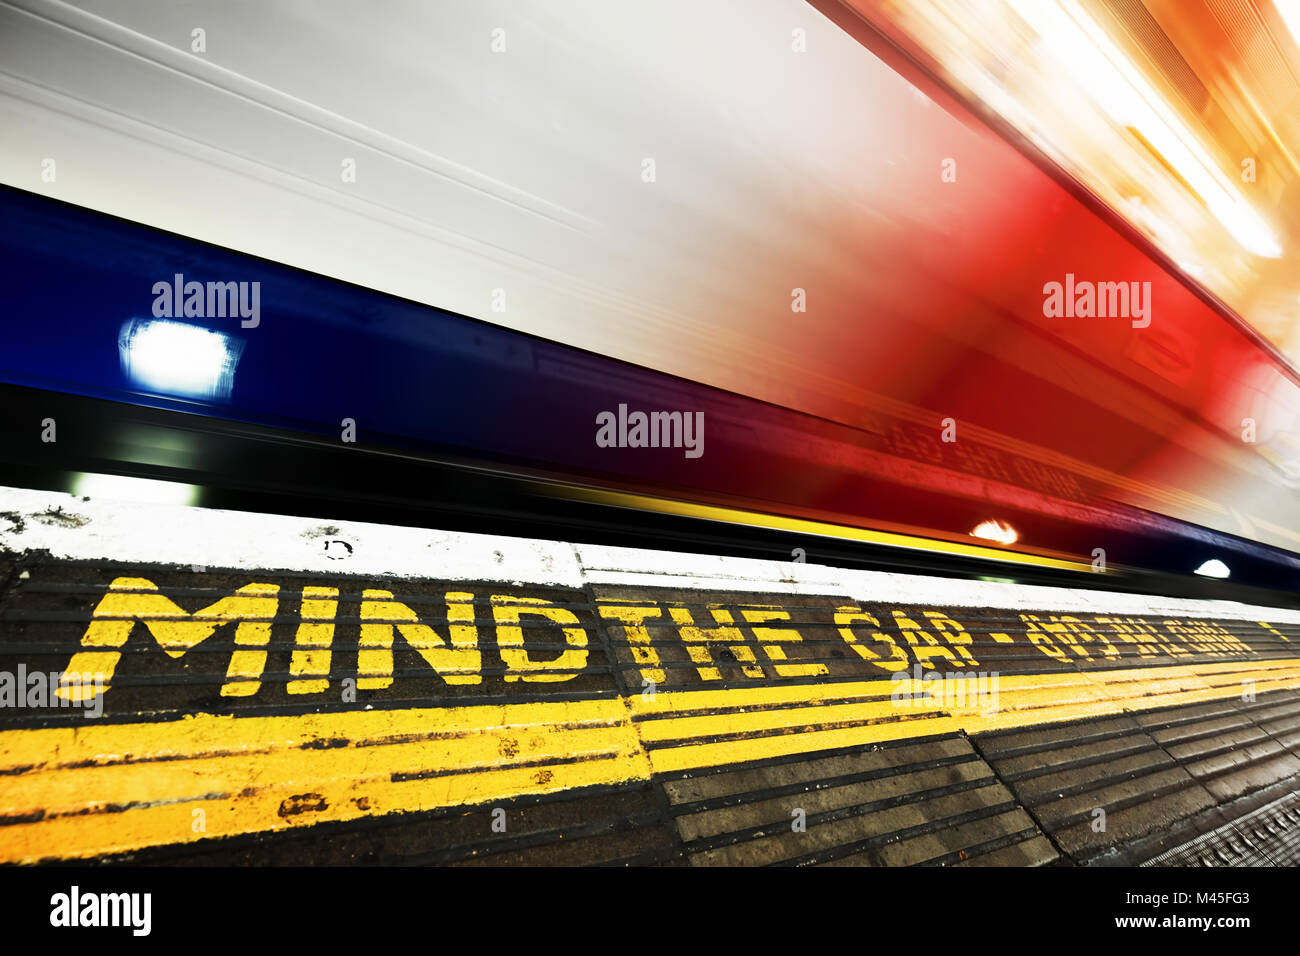 London underground. Mind the gap sign, train in motion. Stock Photo